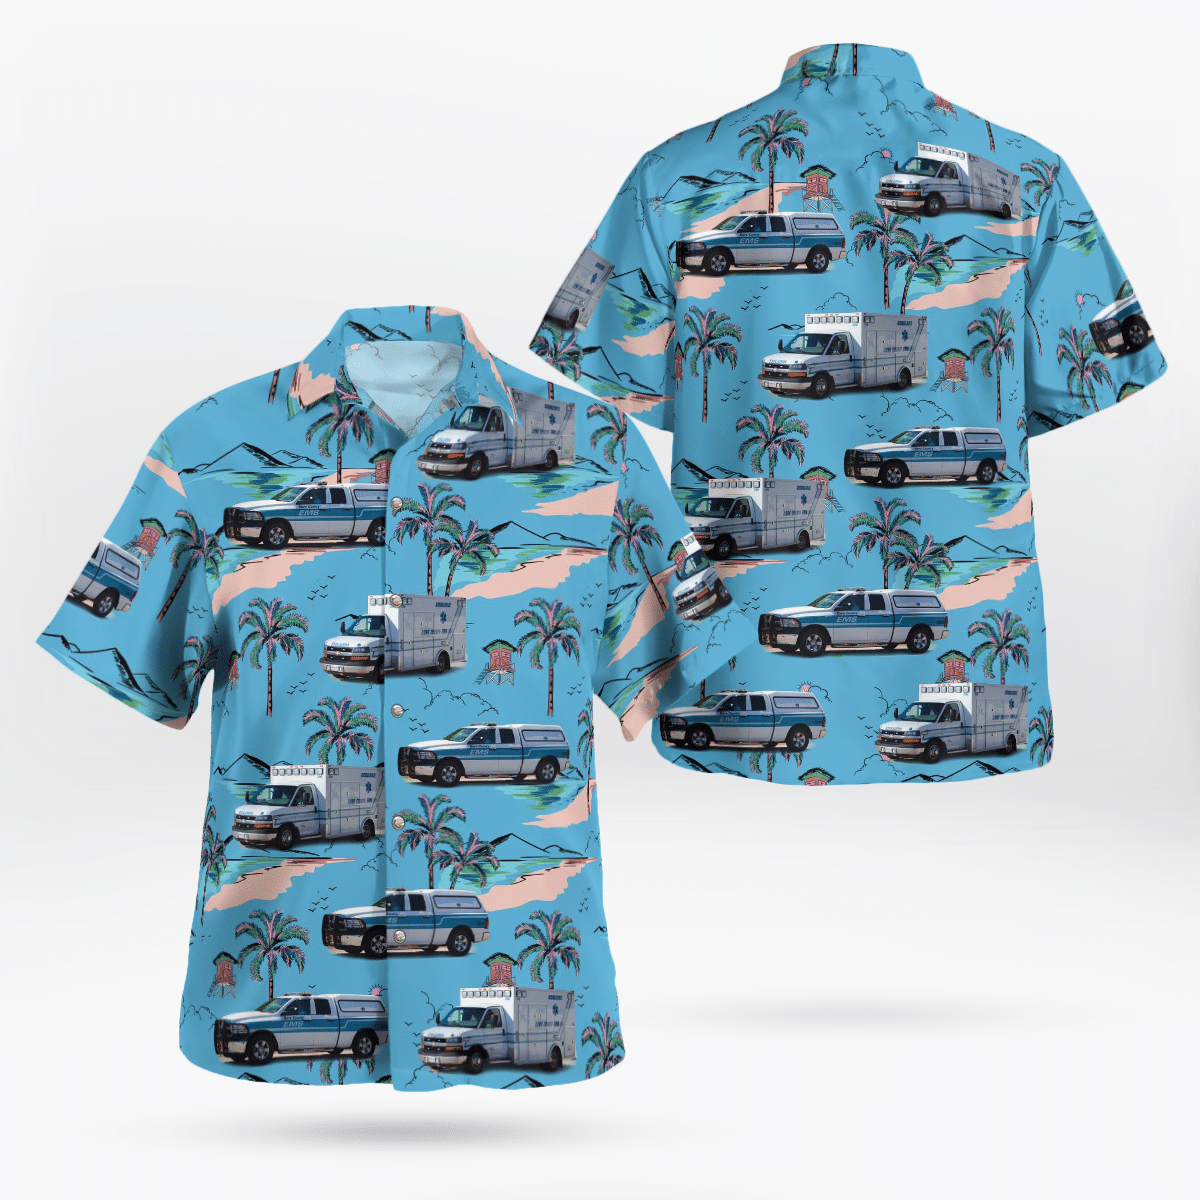 If you want to be noticed, wear These Trendy Hawaiian Shirt 106